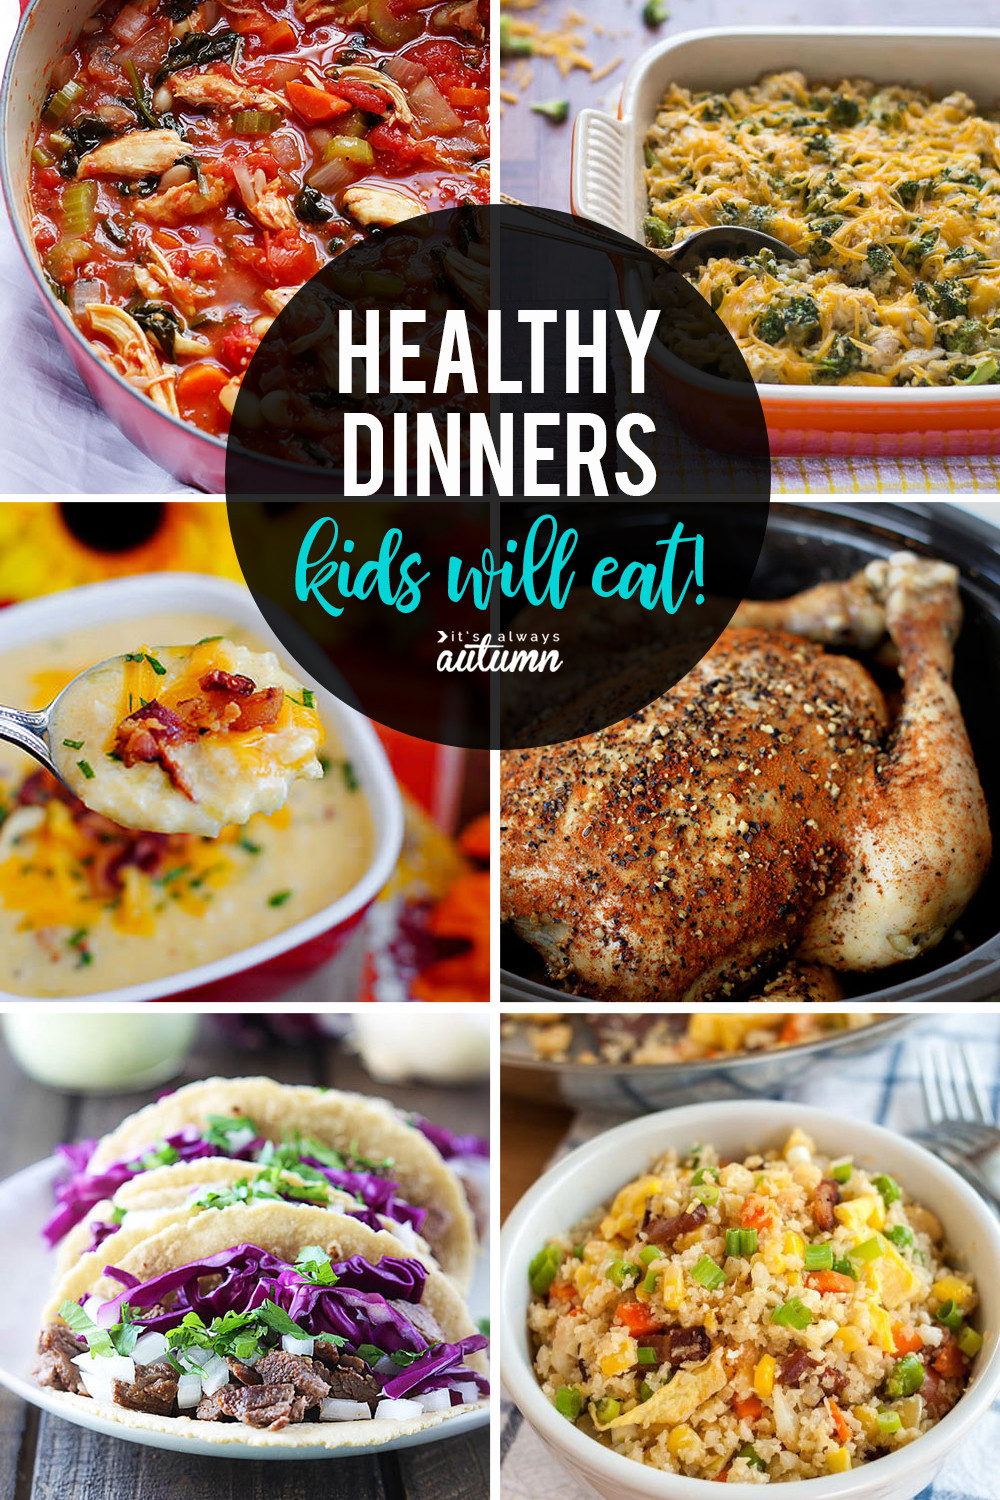 Easy Dinner Ideas For Kids
 20 healthy easy recipes your kids will actually want to